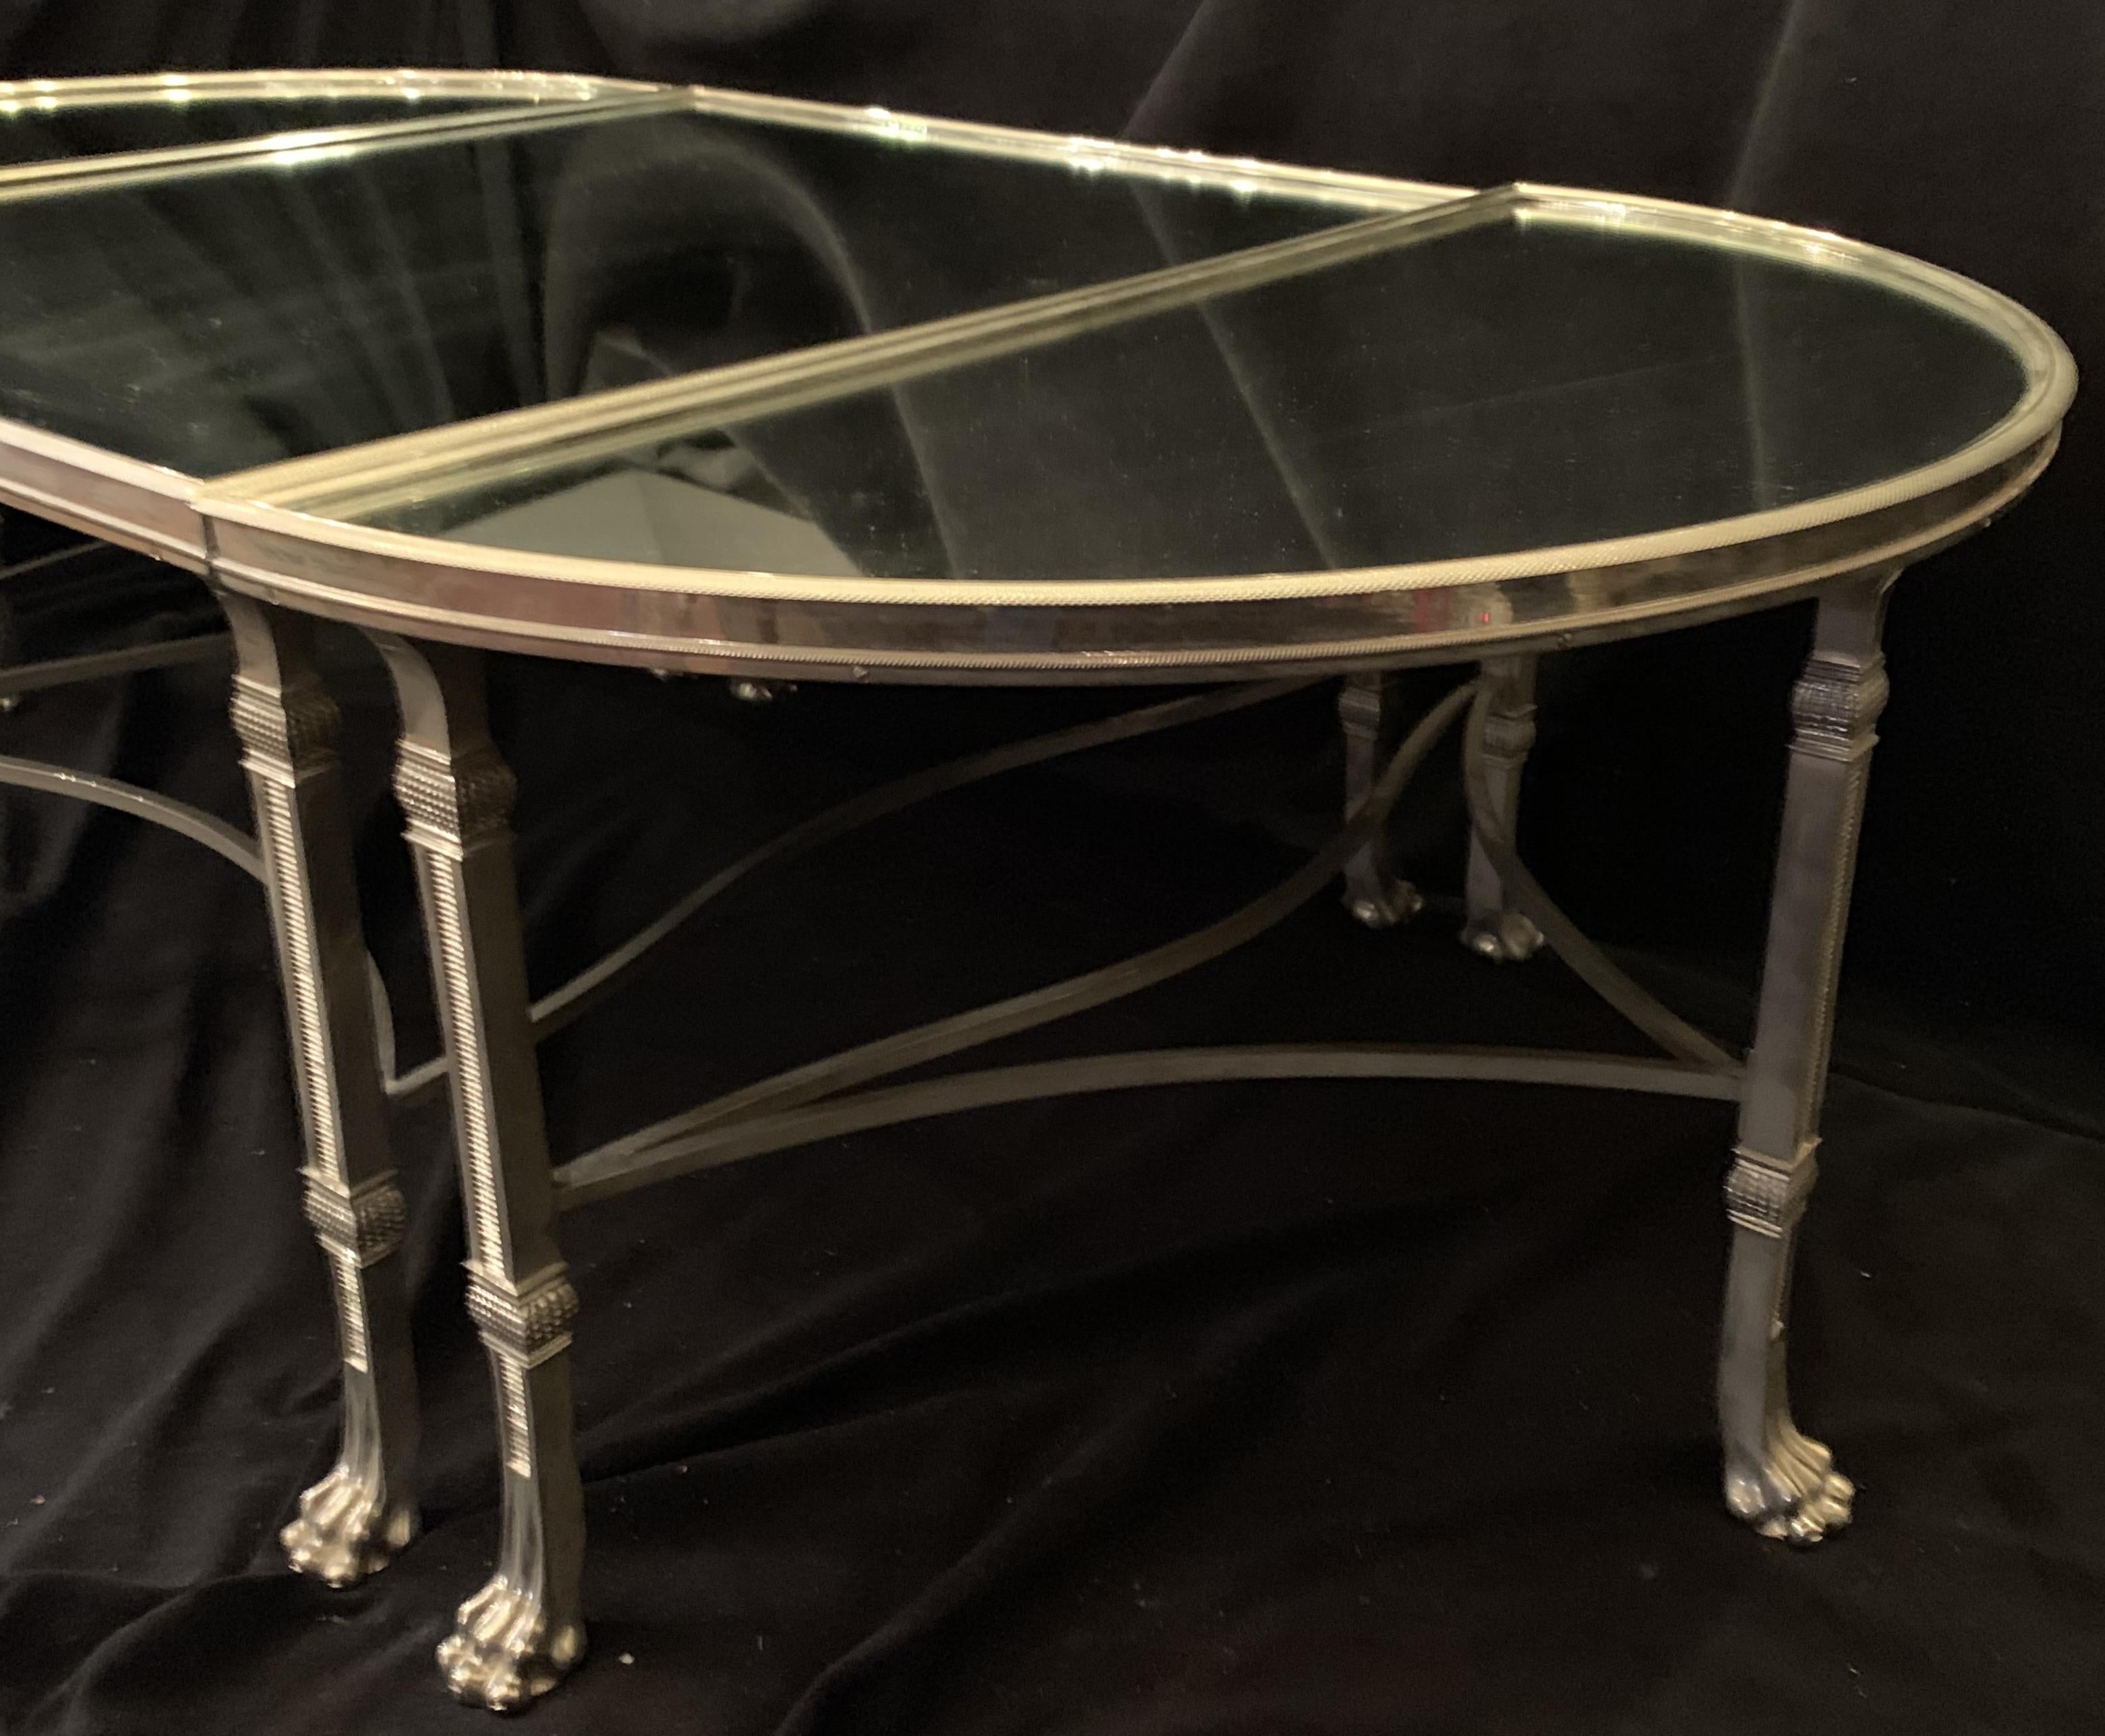 A Wonderful French silver polished nickel over bronze and mirrored three part cocktail / coffee table in the Regency style, with paw feet and stretchers across the bottom. Consisting of a square center sections and two rounded ends that are